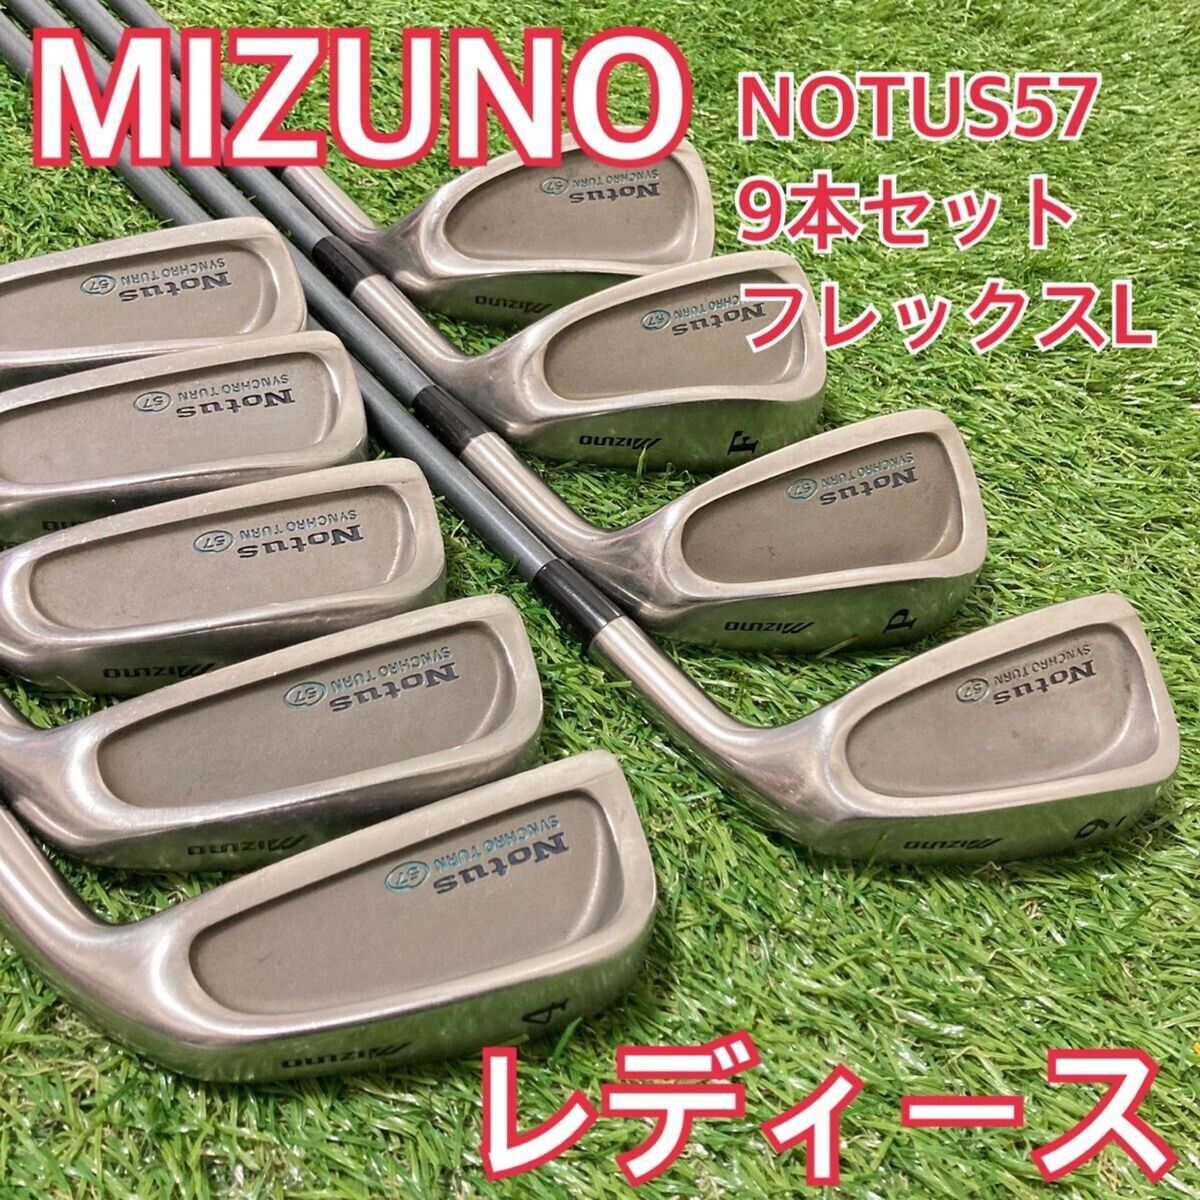 Mizuno Ladies Iron Set L 4-9, PW, SW, AS 9 pieces in total from Japan Used